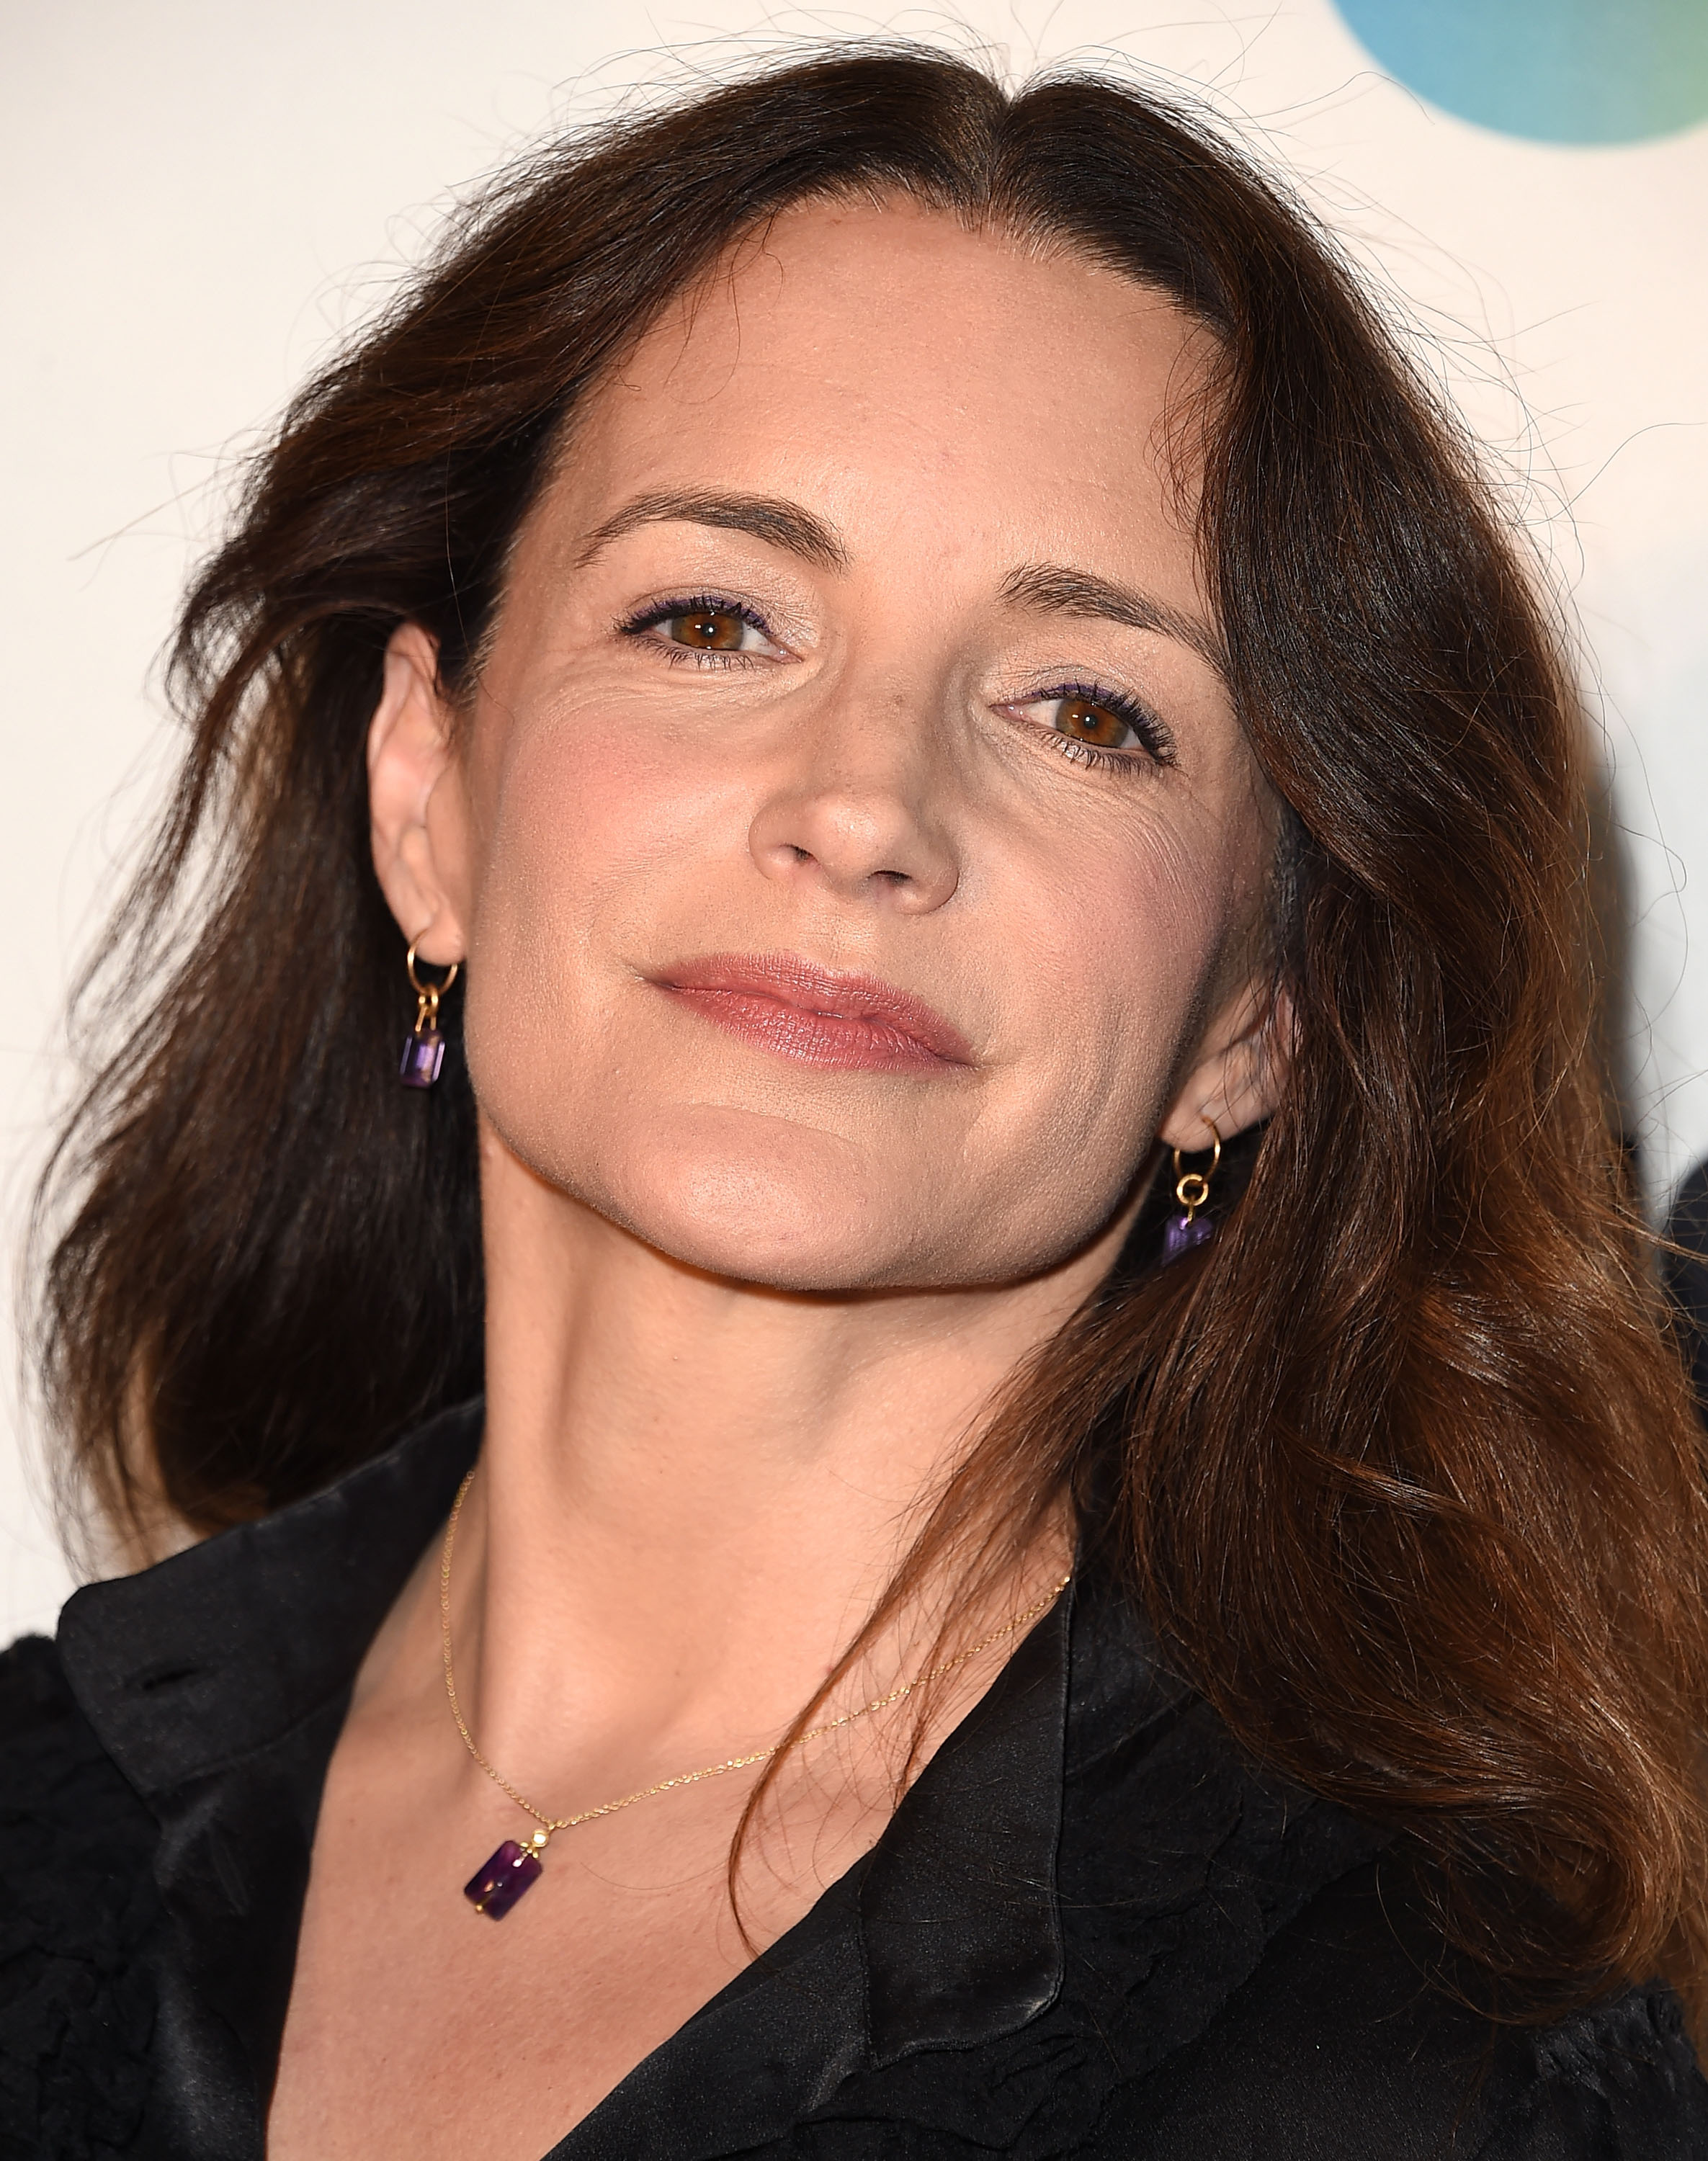 Kristin Davis at the The Annenberg Space For Photography Presents "Refugee" at Annenberg Space For Photography on April 21, 2016 in California. | Source: Getty Images